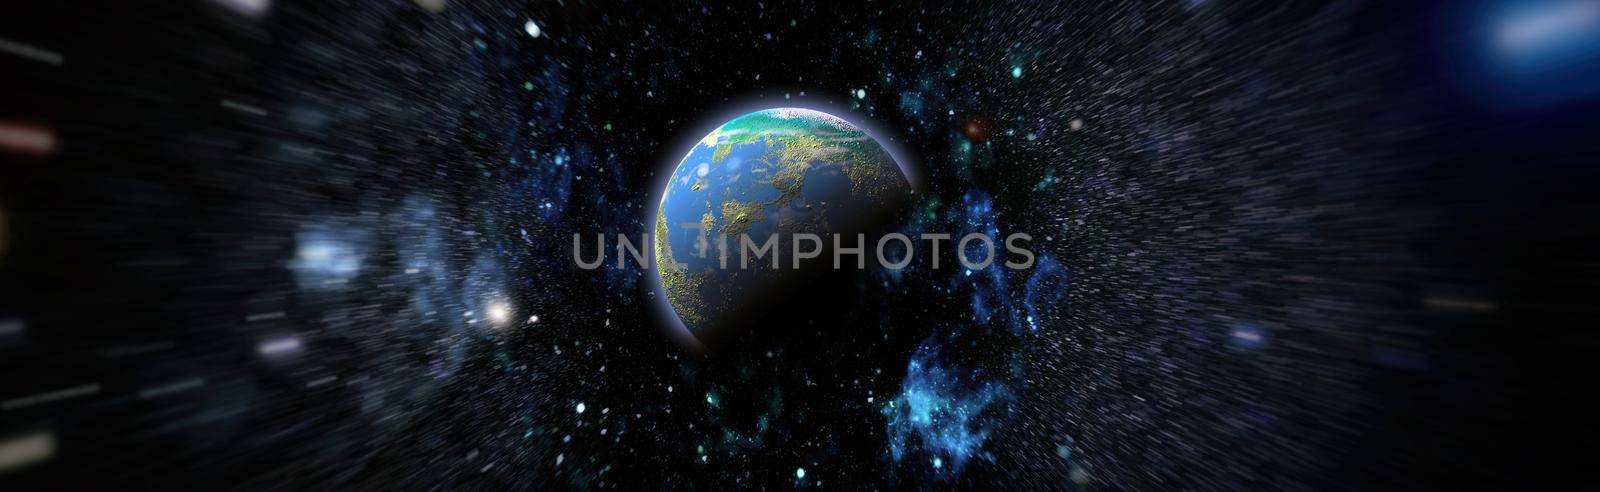 Outer space. Science fiction cosmos. planets, stars and galaxies in outer space showing the beauty of space exploration. by Maximusnd